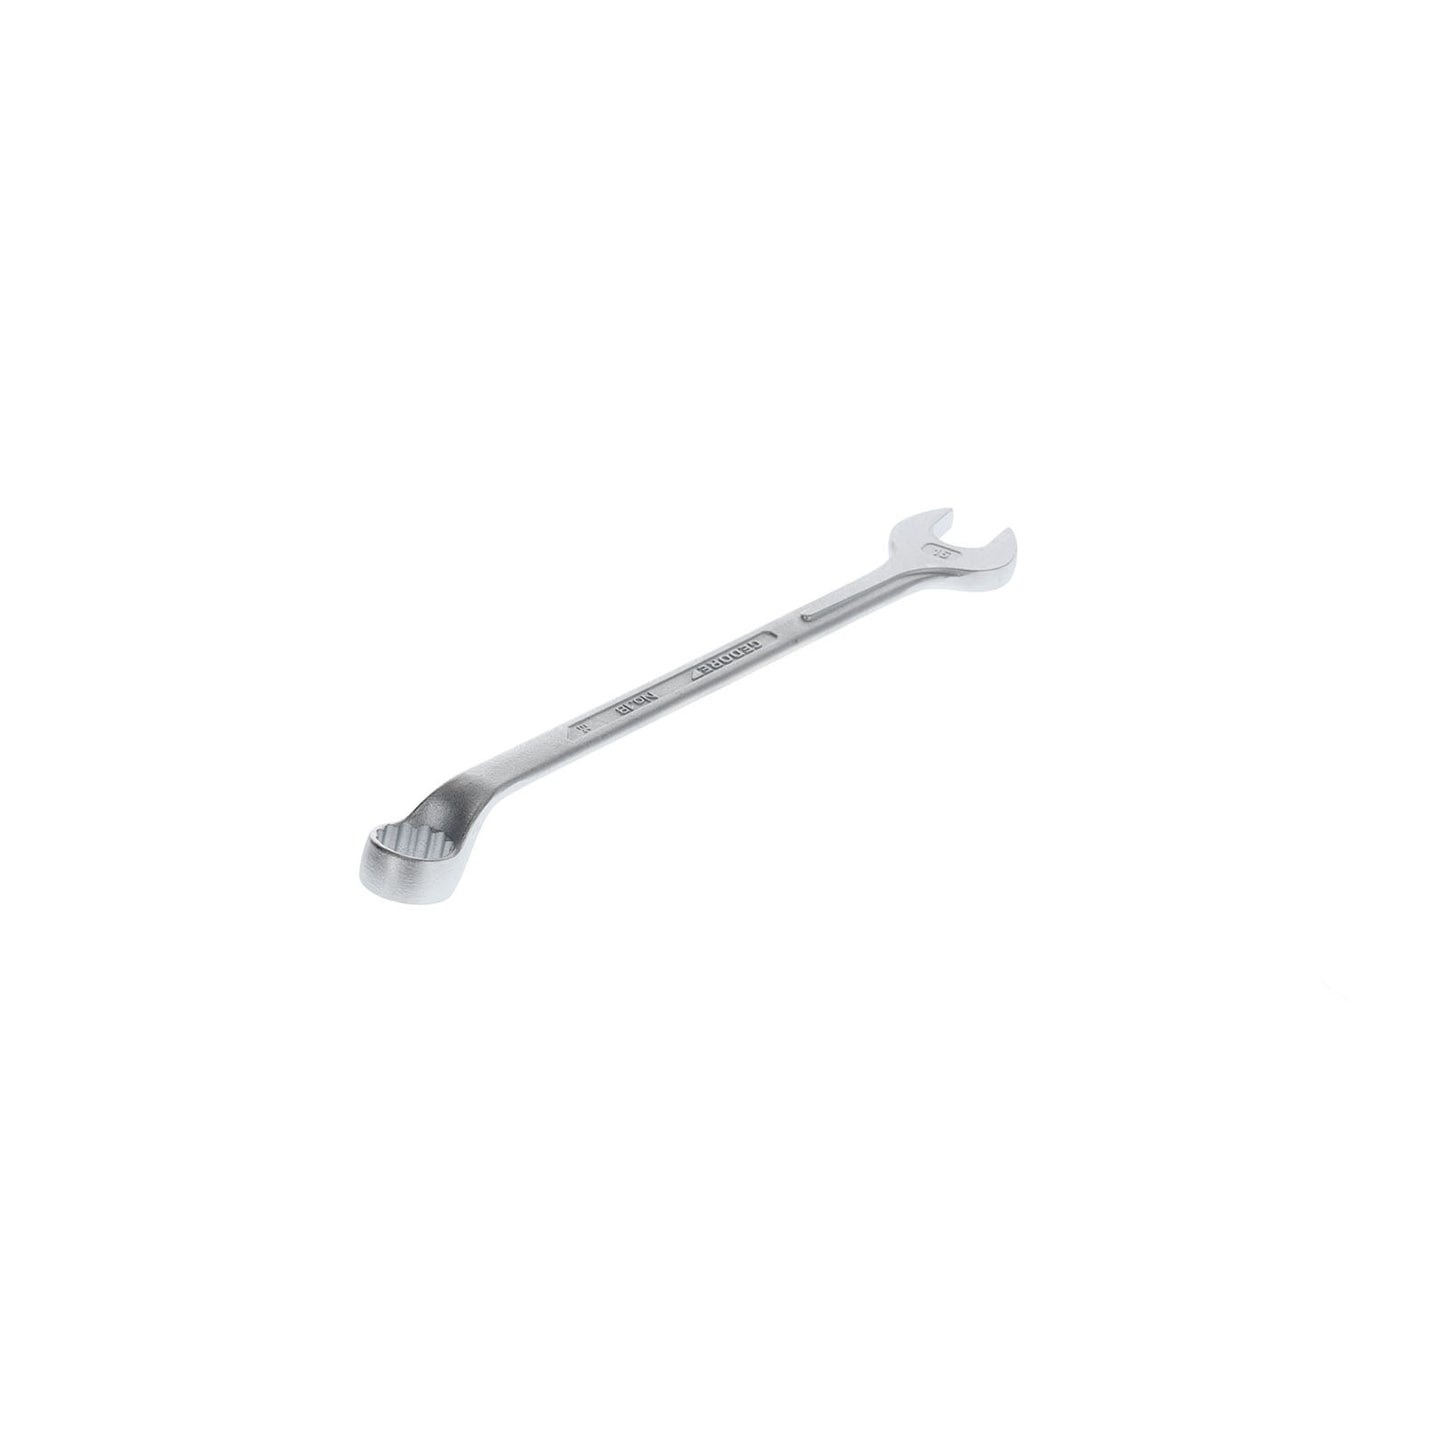 GEDORE 1 B 16 - Offset Combination Wrench, 16mm (6001560)